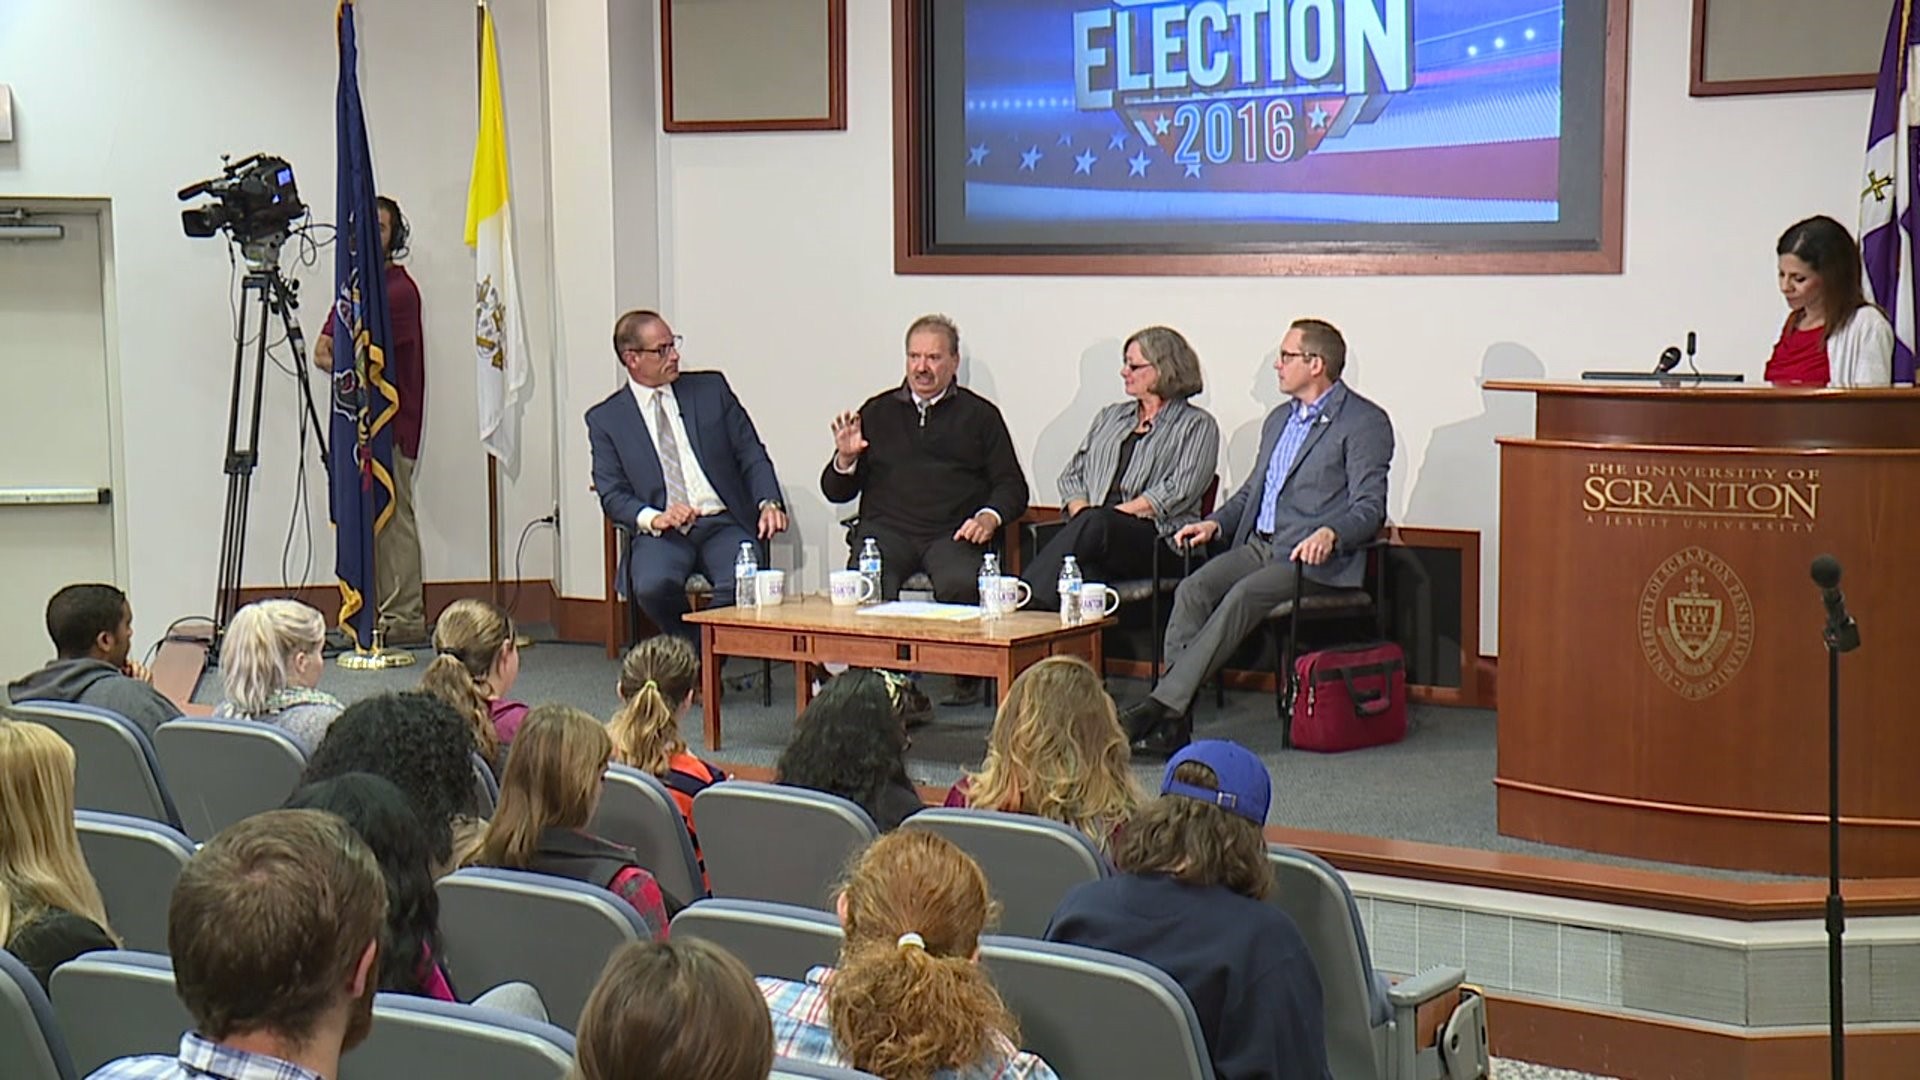 Political Roundtable Discussion at University of Scranton